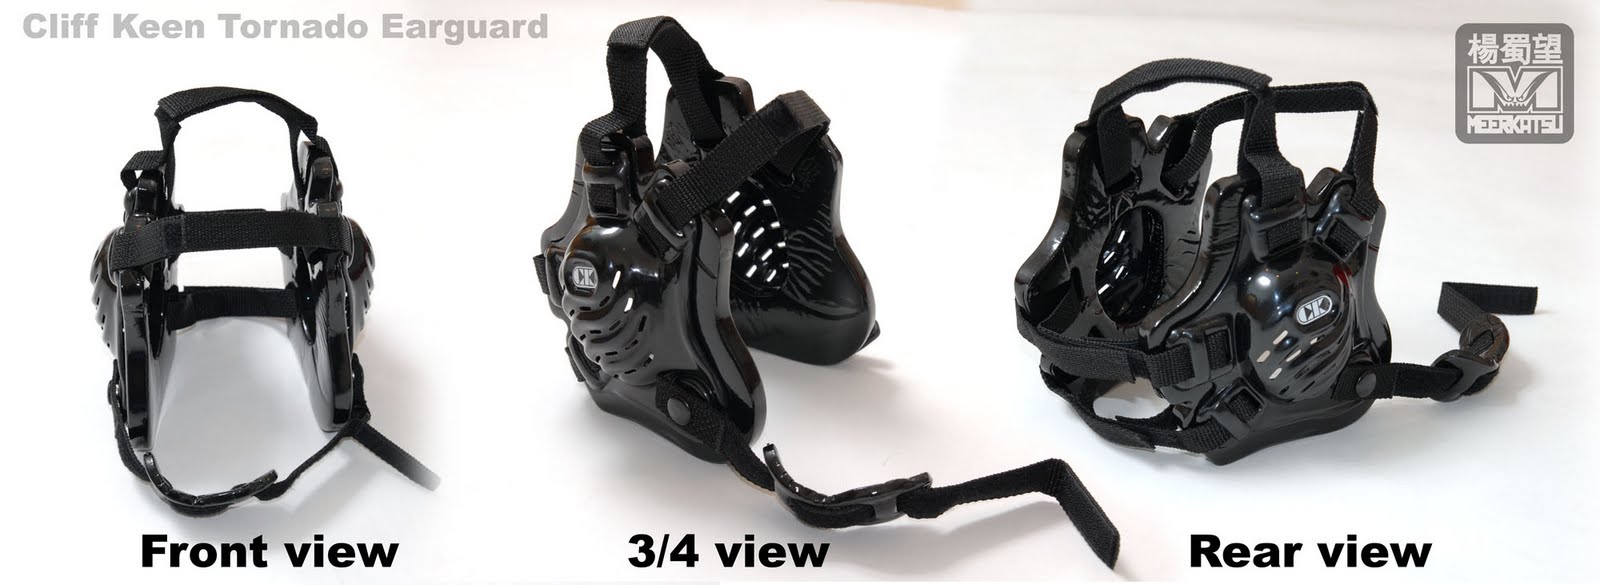 Meerkatsu's Blog: Gear Review: Cliff Keen and Brute Earguards